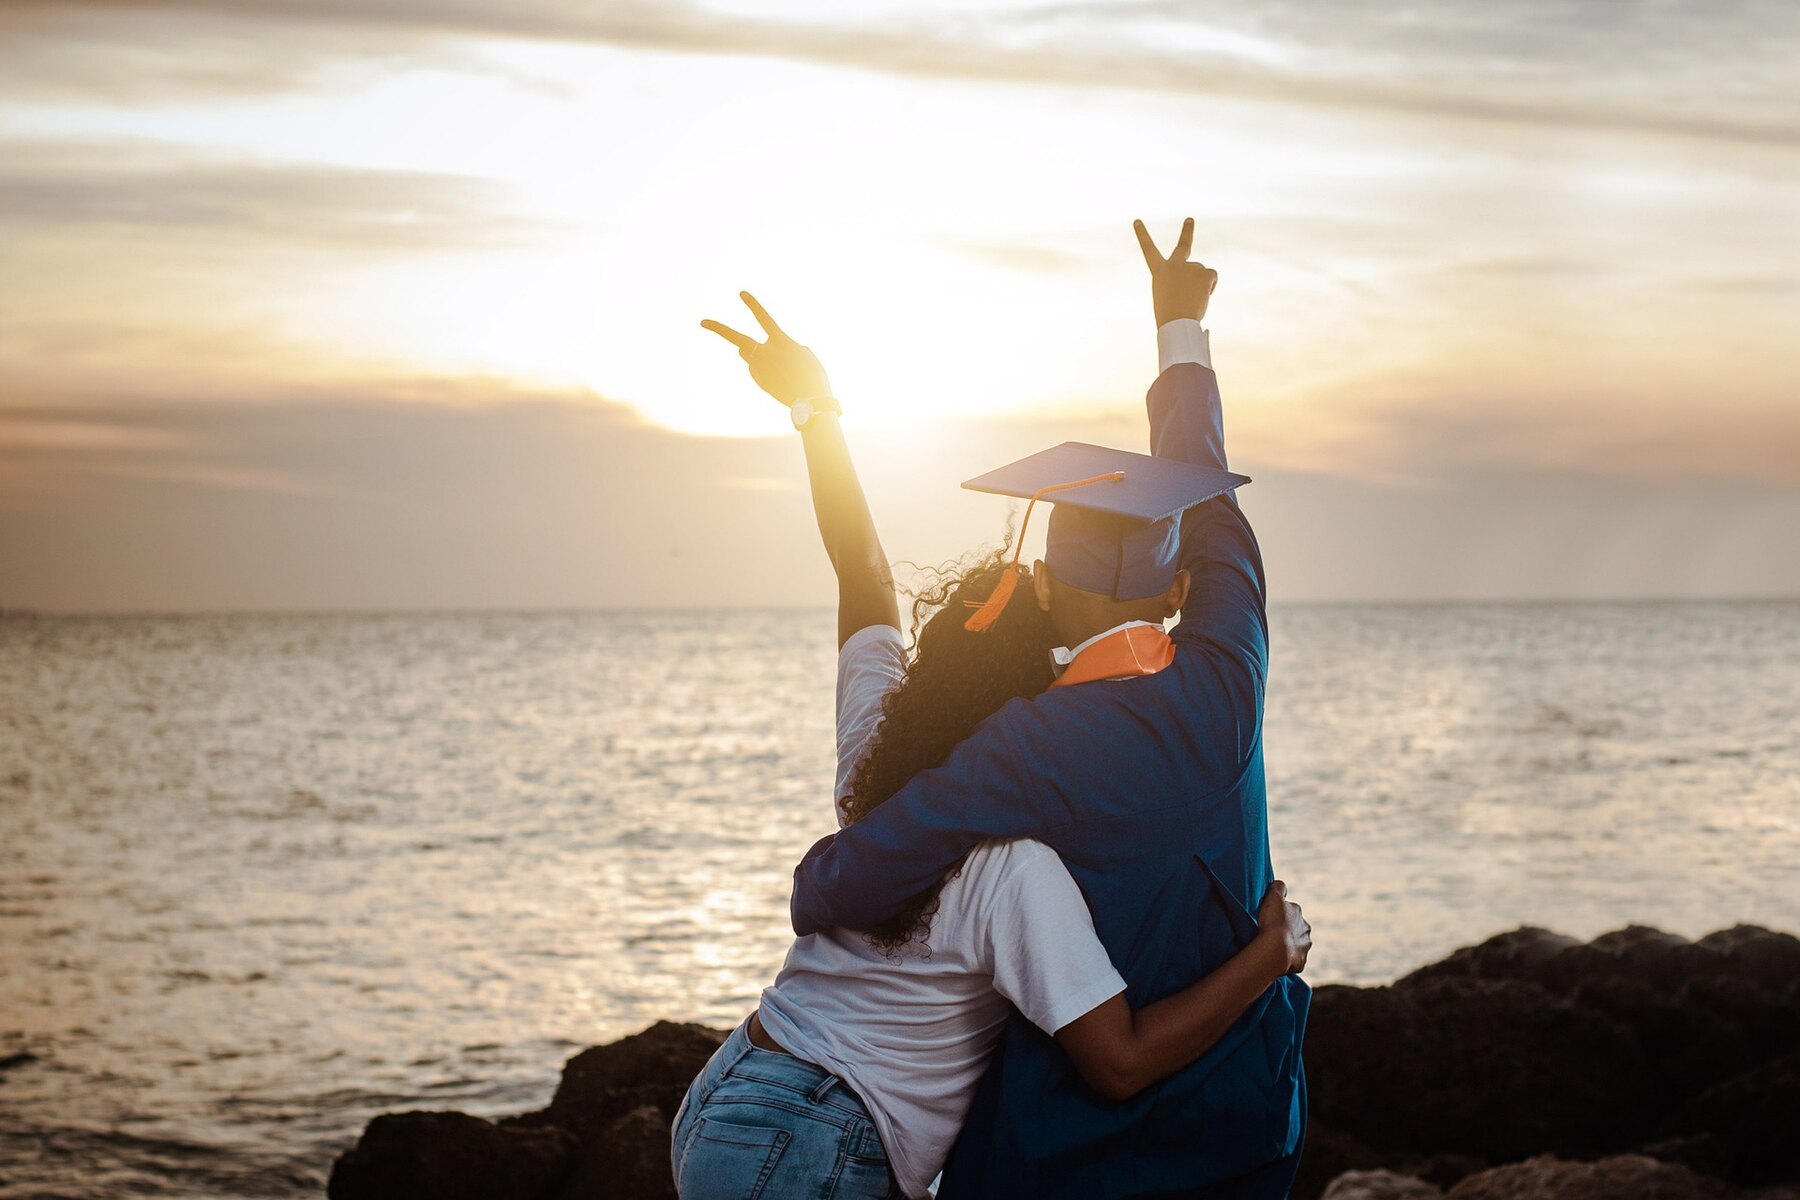 A woman and a man in graduation robes and cap celebrating on a beach with their arms around each other